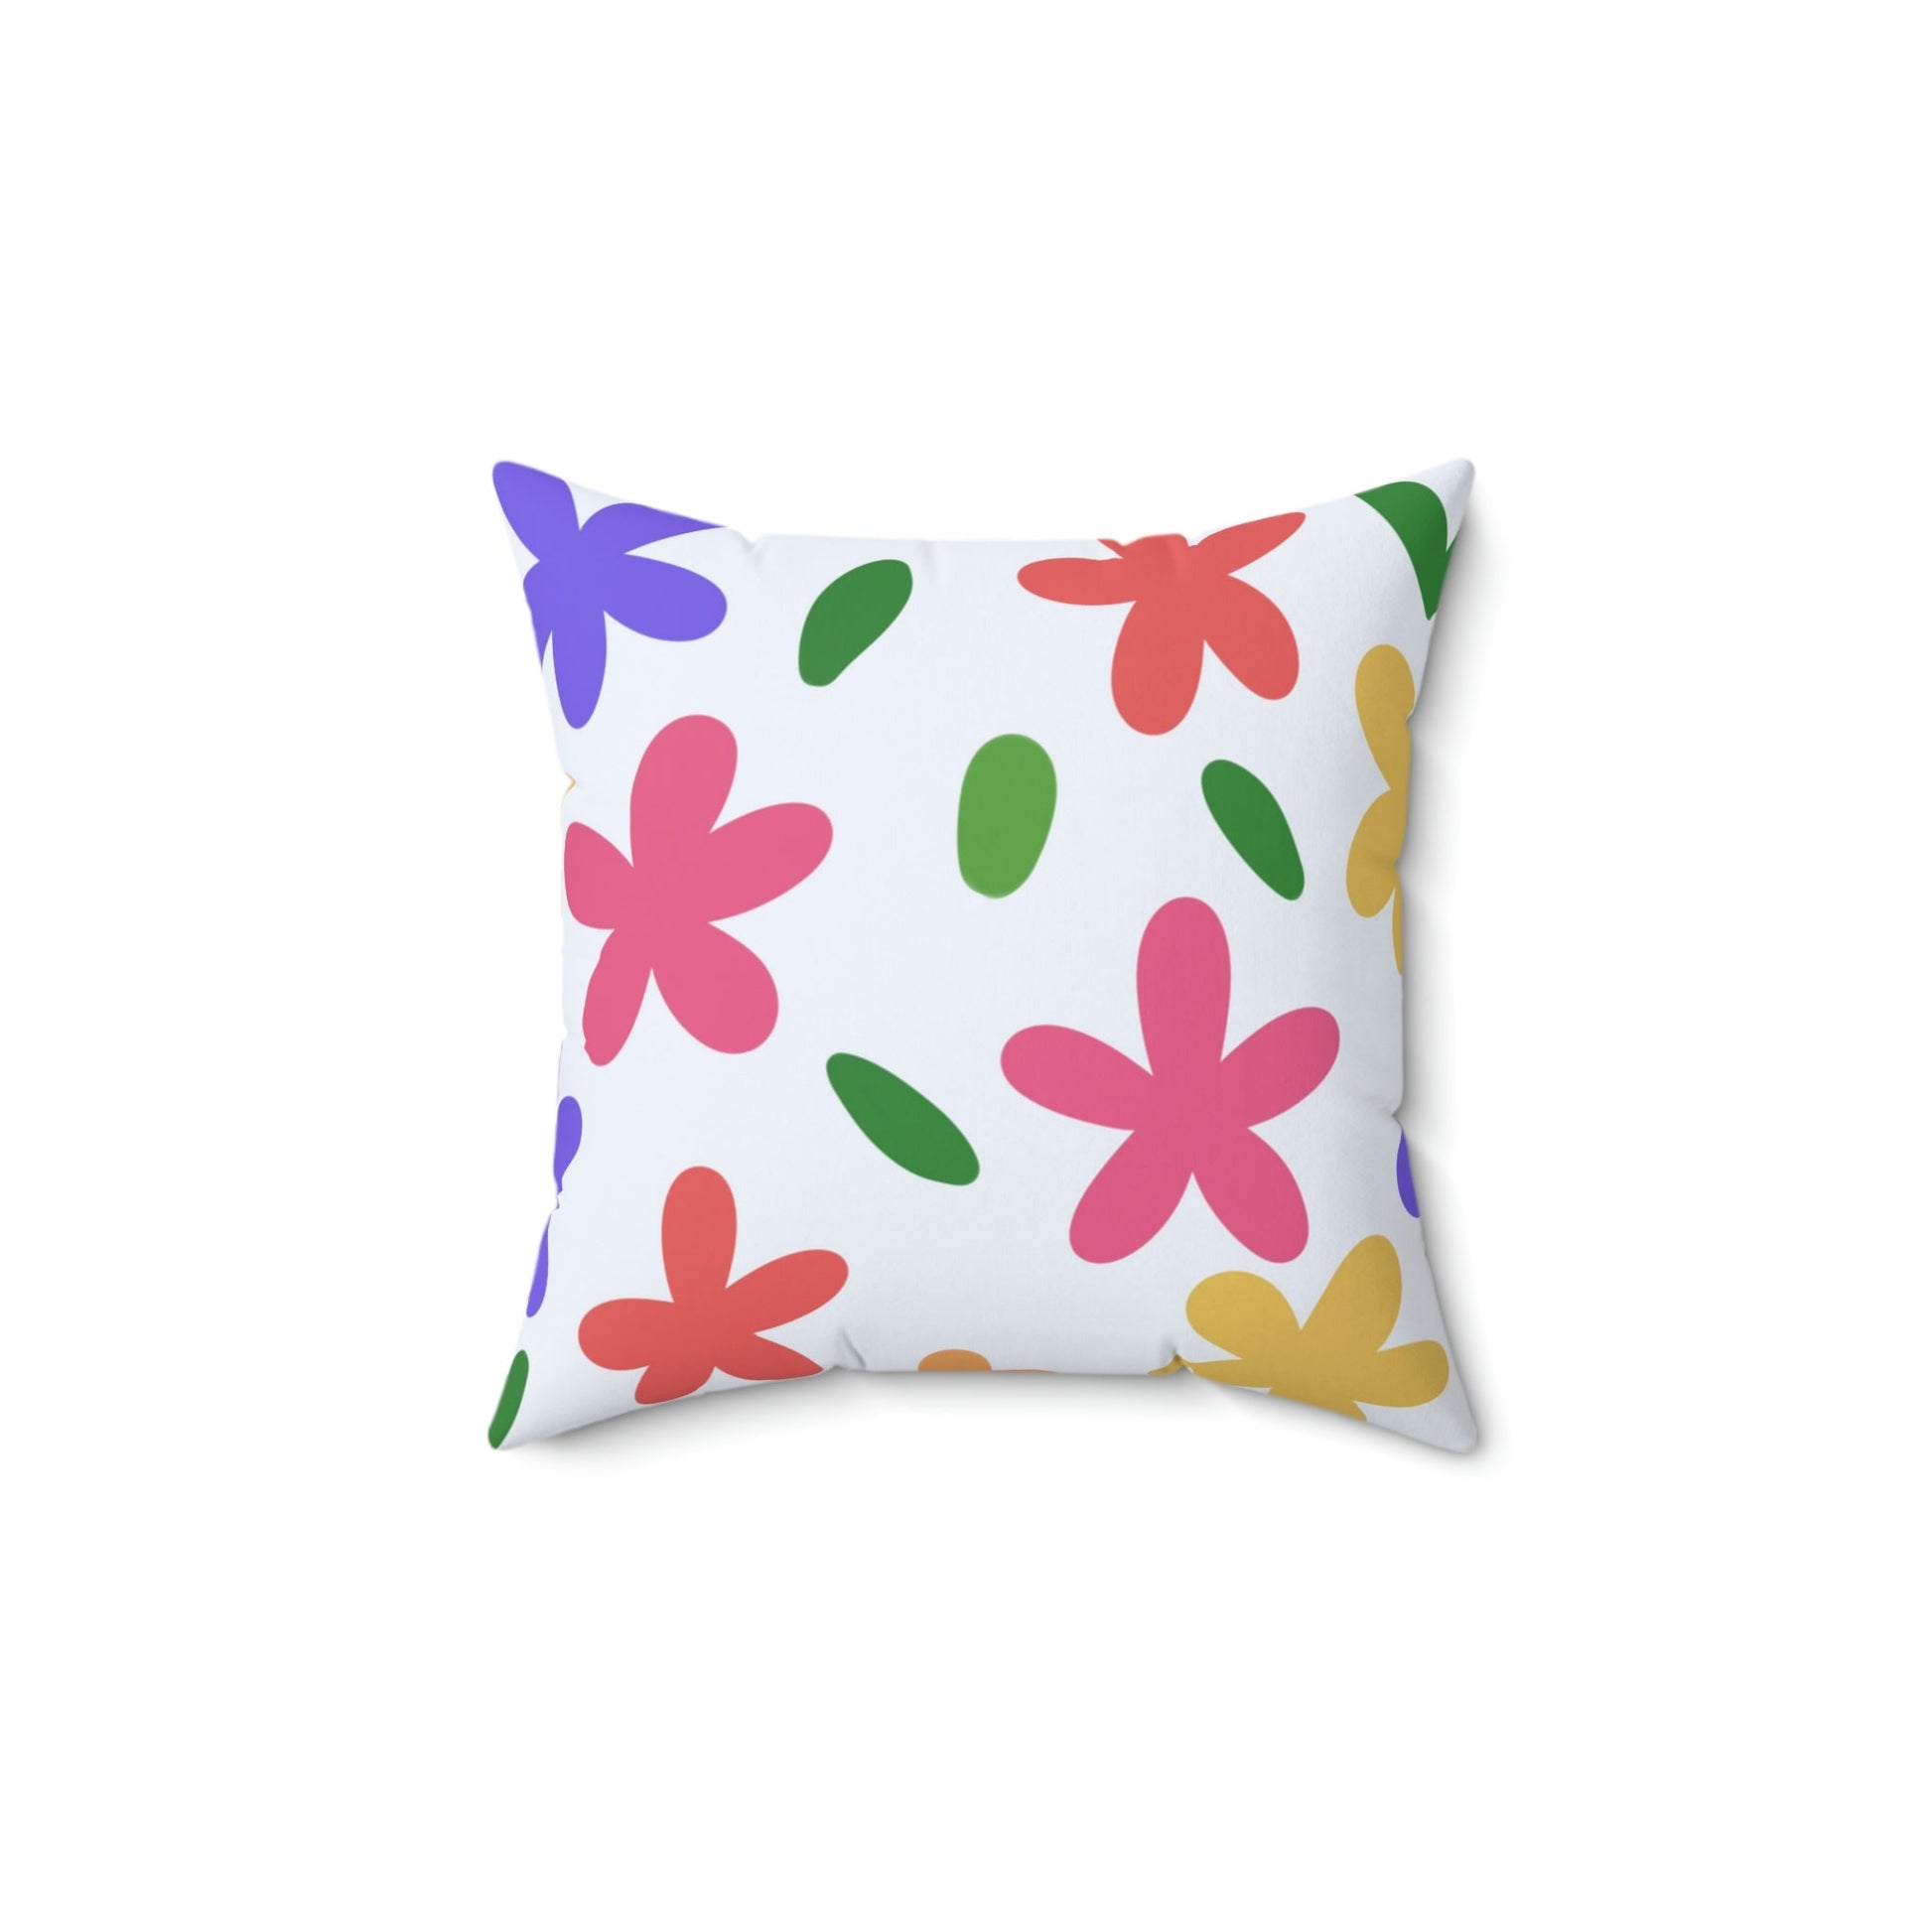 Cute Flowers in Bloom Square Pillow Home Decor Pink Sweetheart